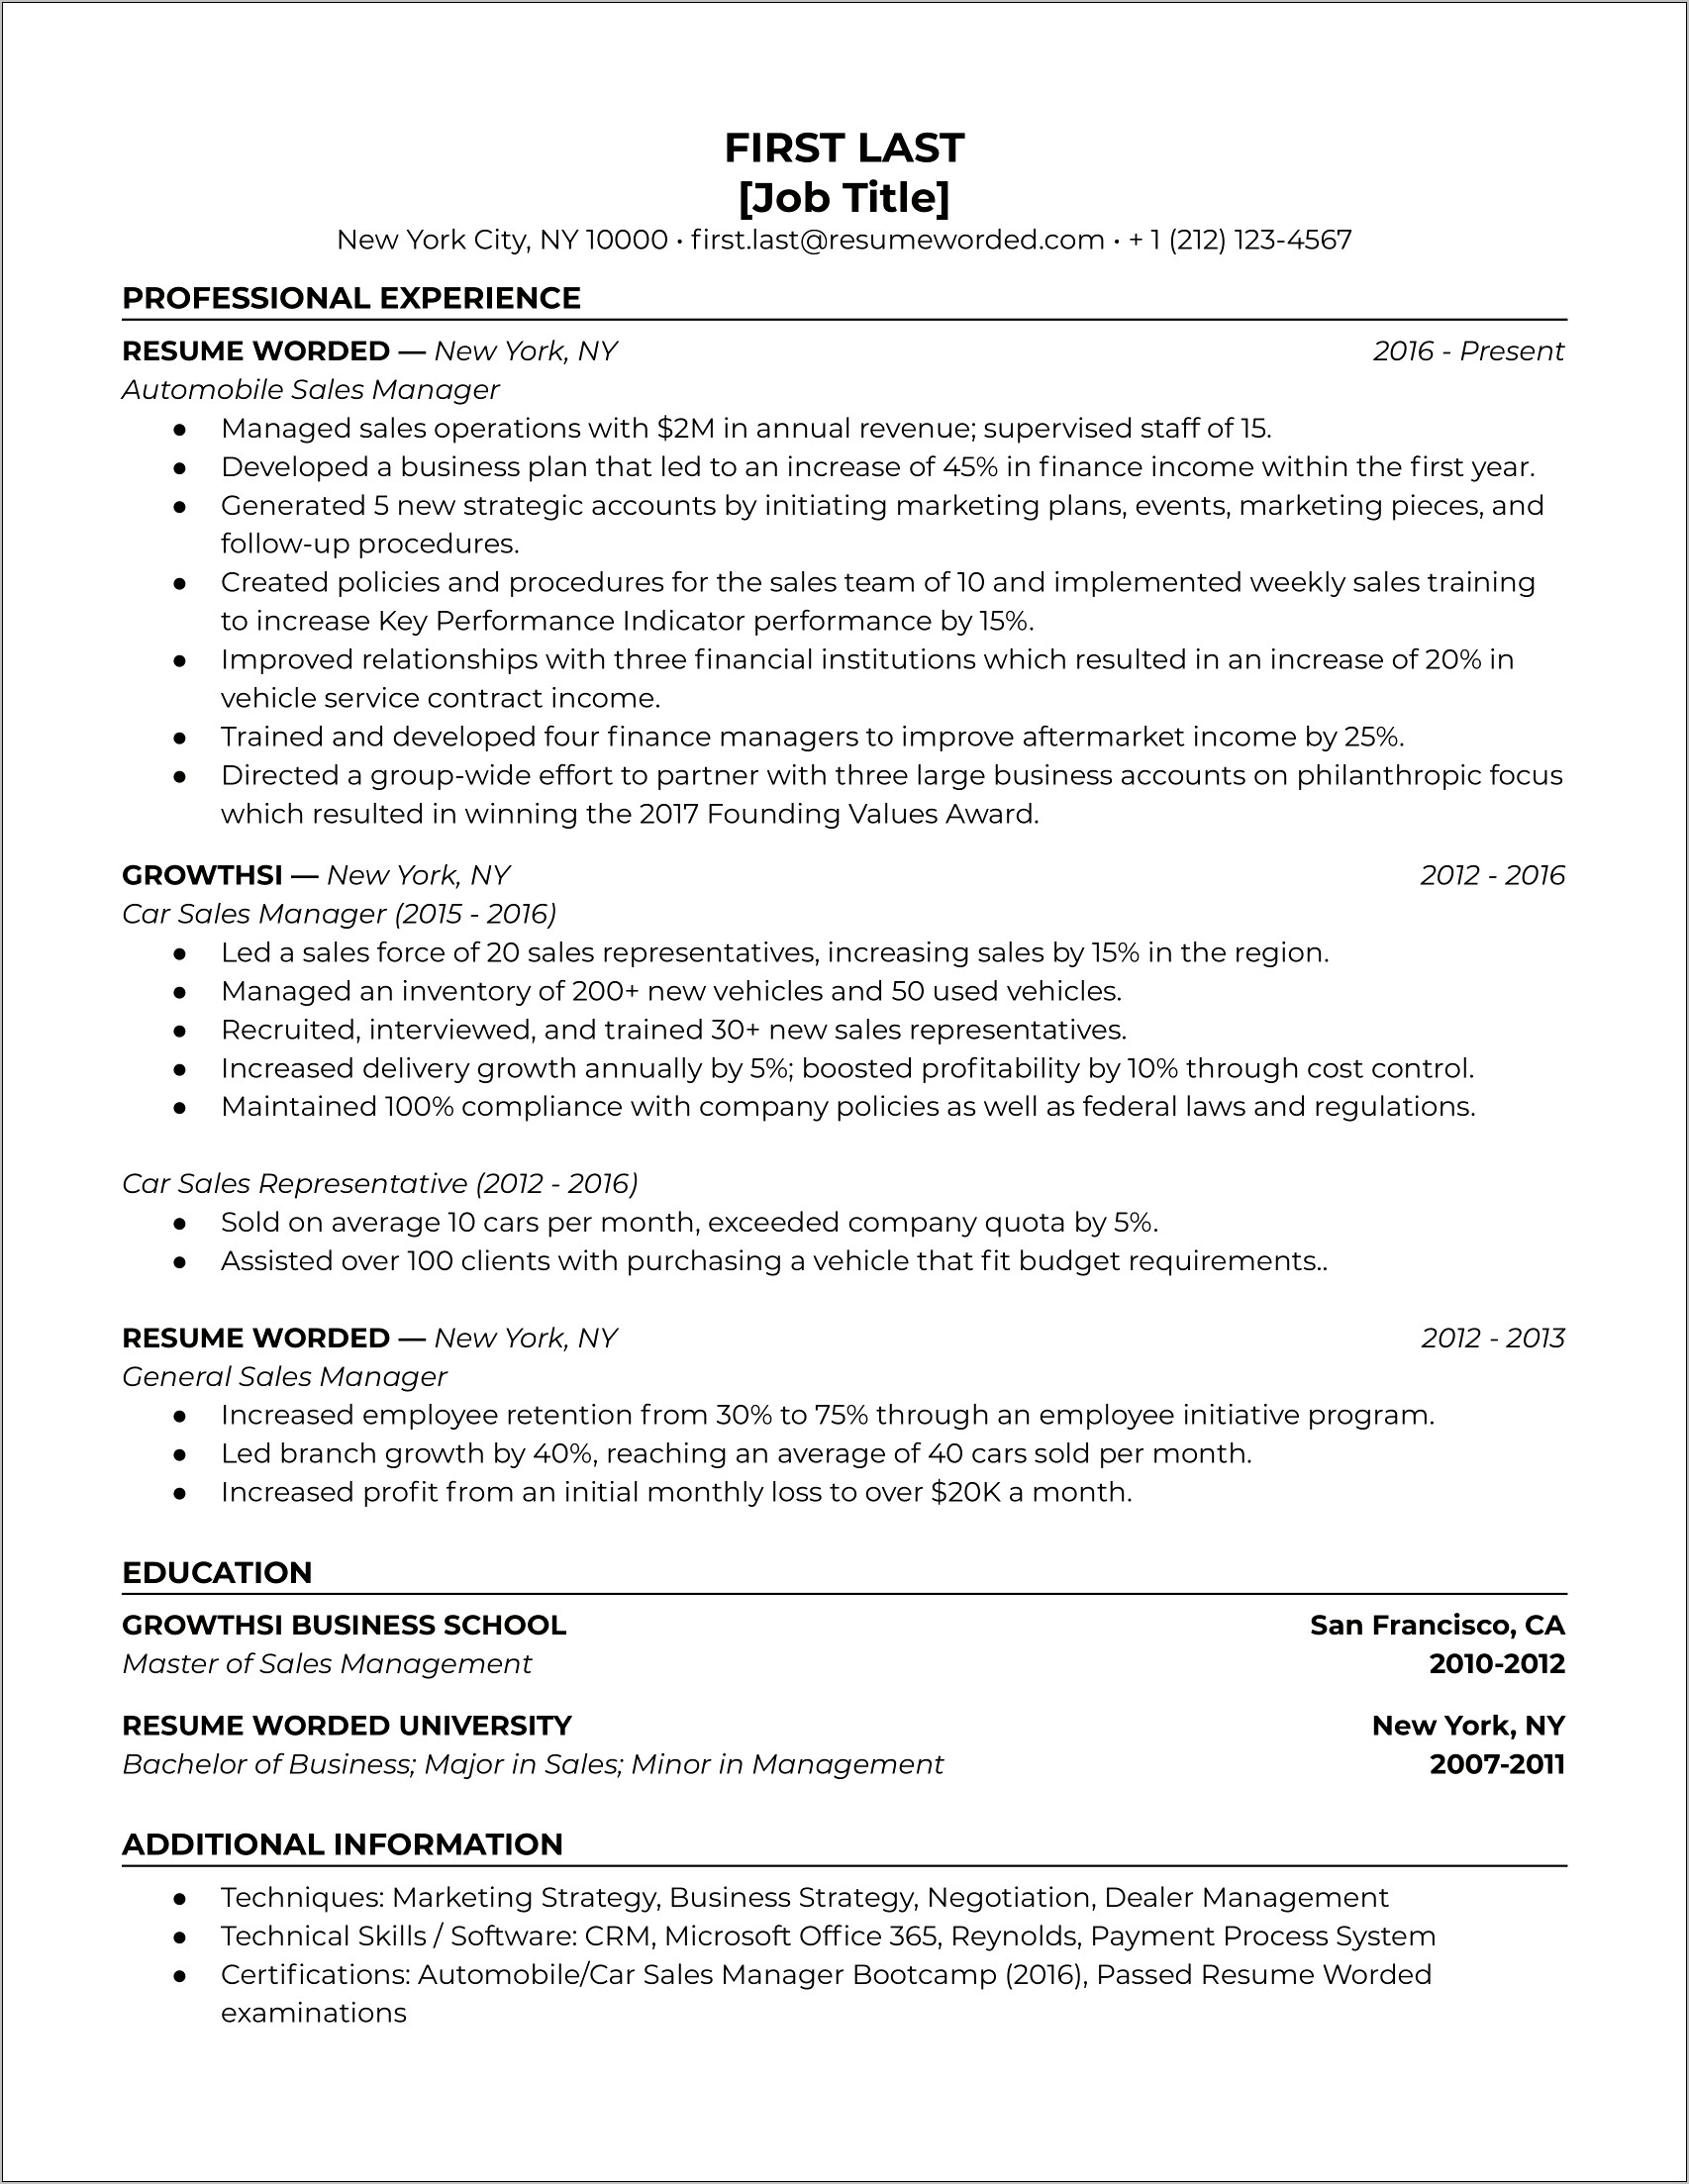 Example Resume Of Retail Store Manager